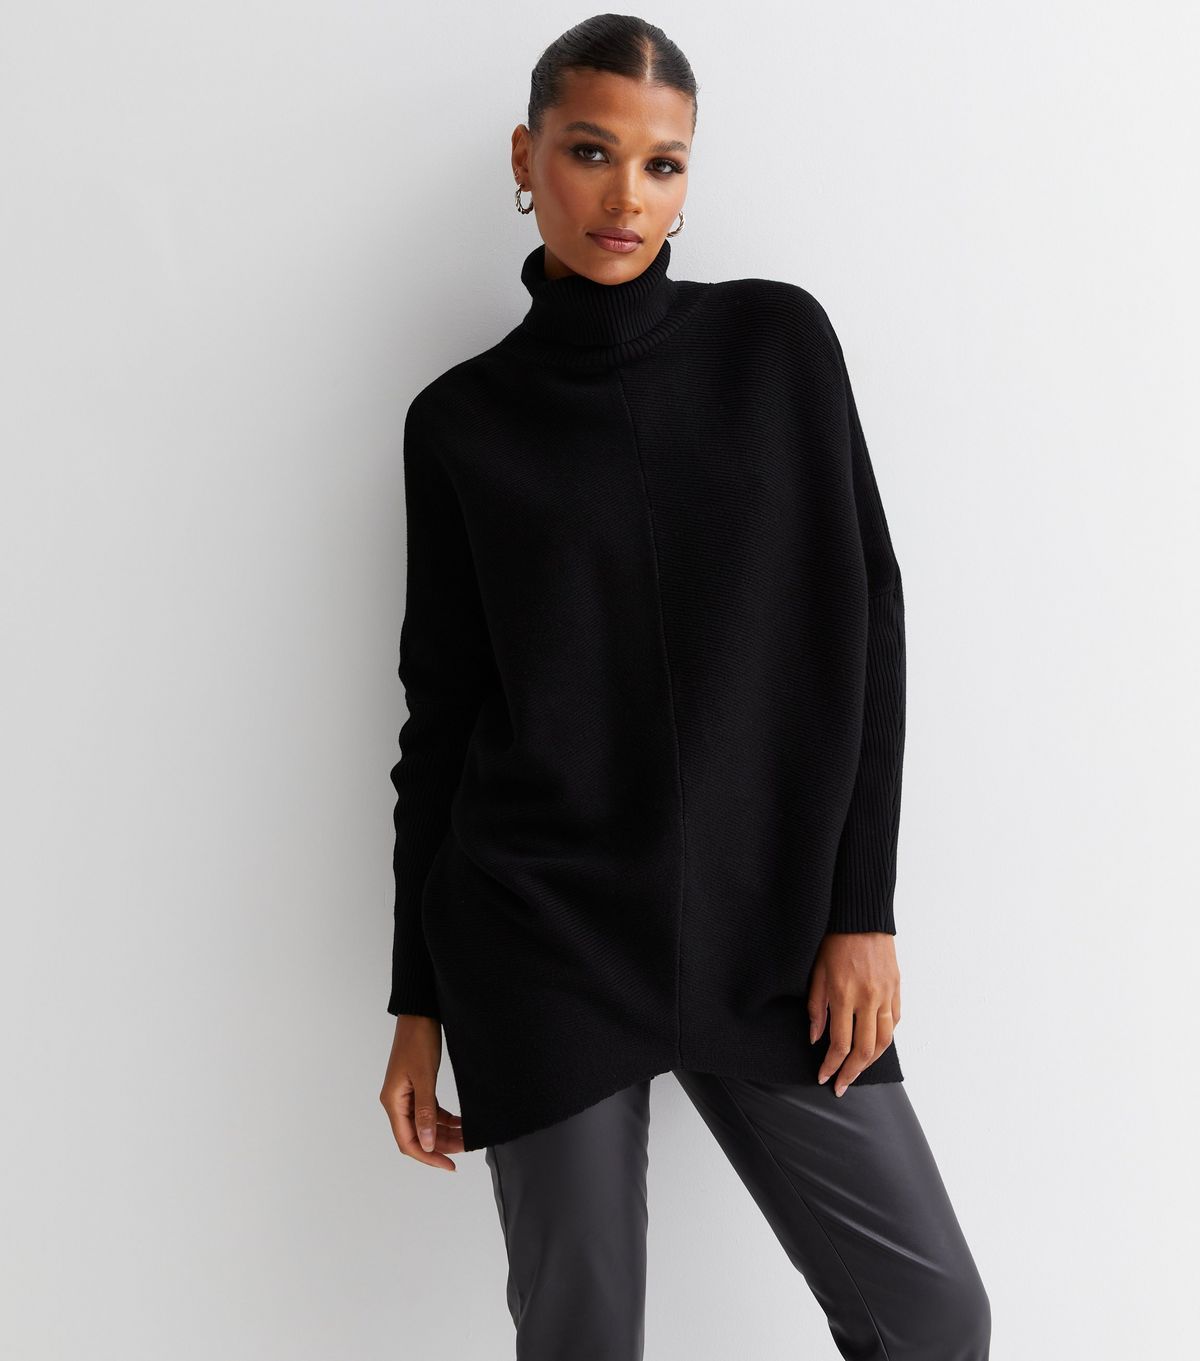 Blue Vanilla Black Ribbed Knit Roll Neck Jumper
						
						Add to Saved Items
						Remove from... | New Look (UK)